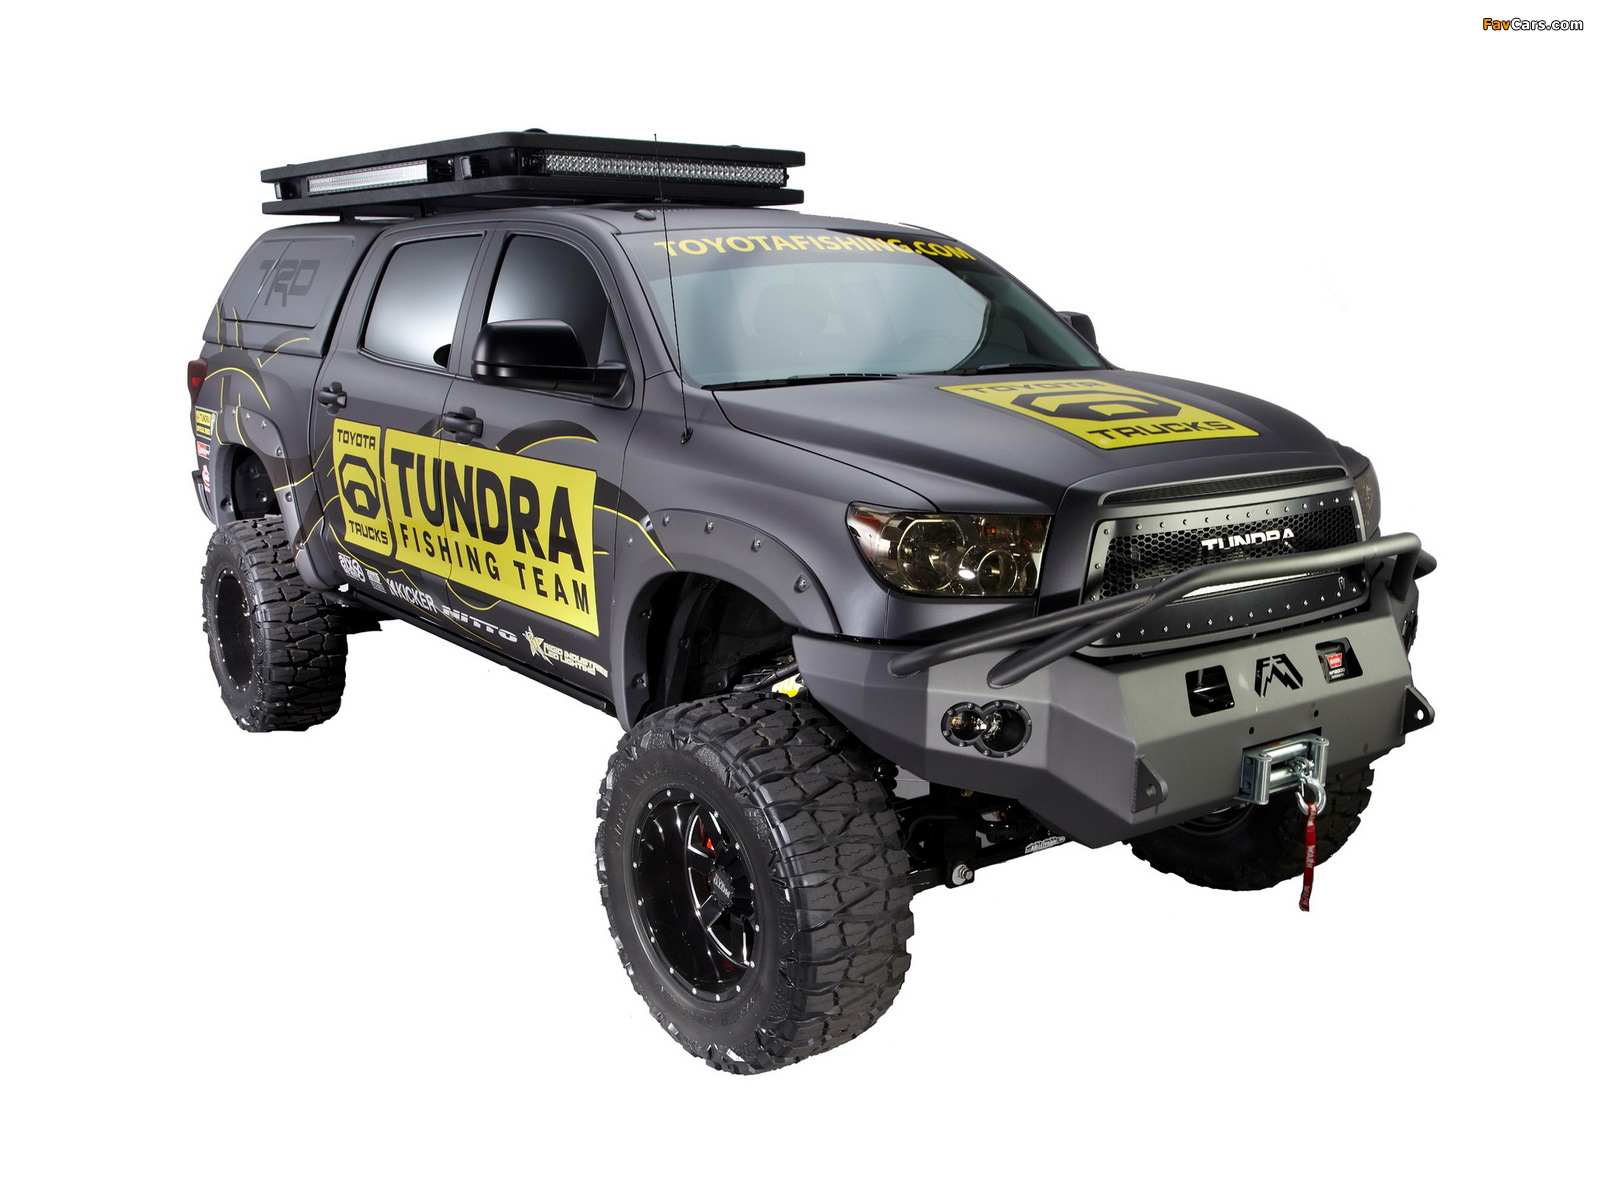 Toyota Tundra Ultimate Fishing by Pro Bass Anglers 2012 photos (1600 x 1200)